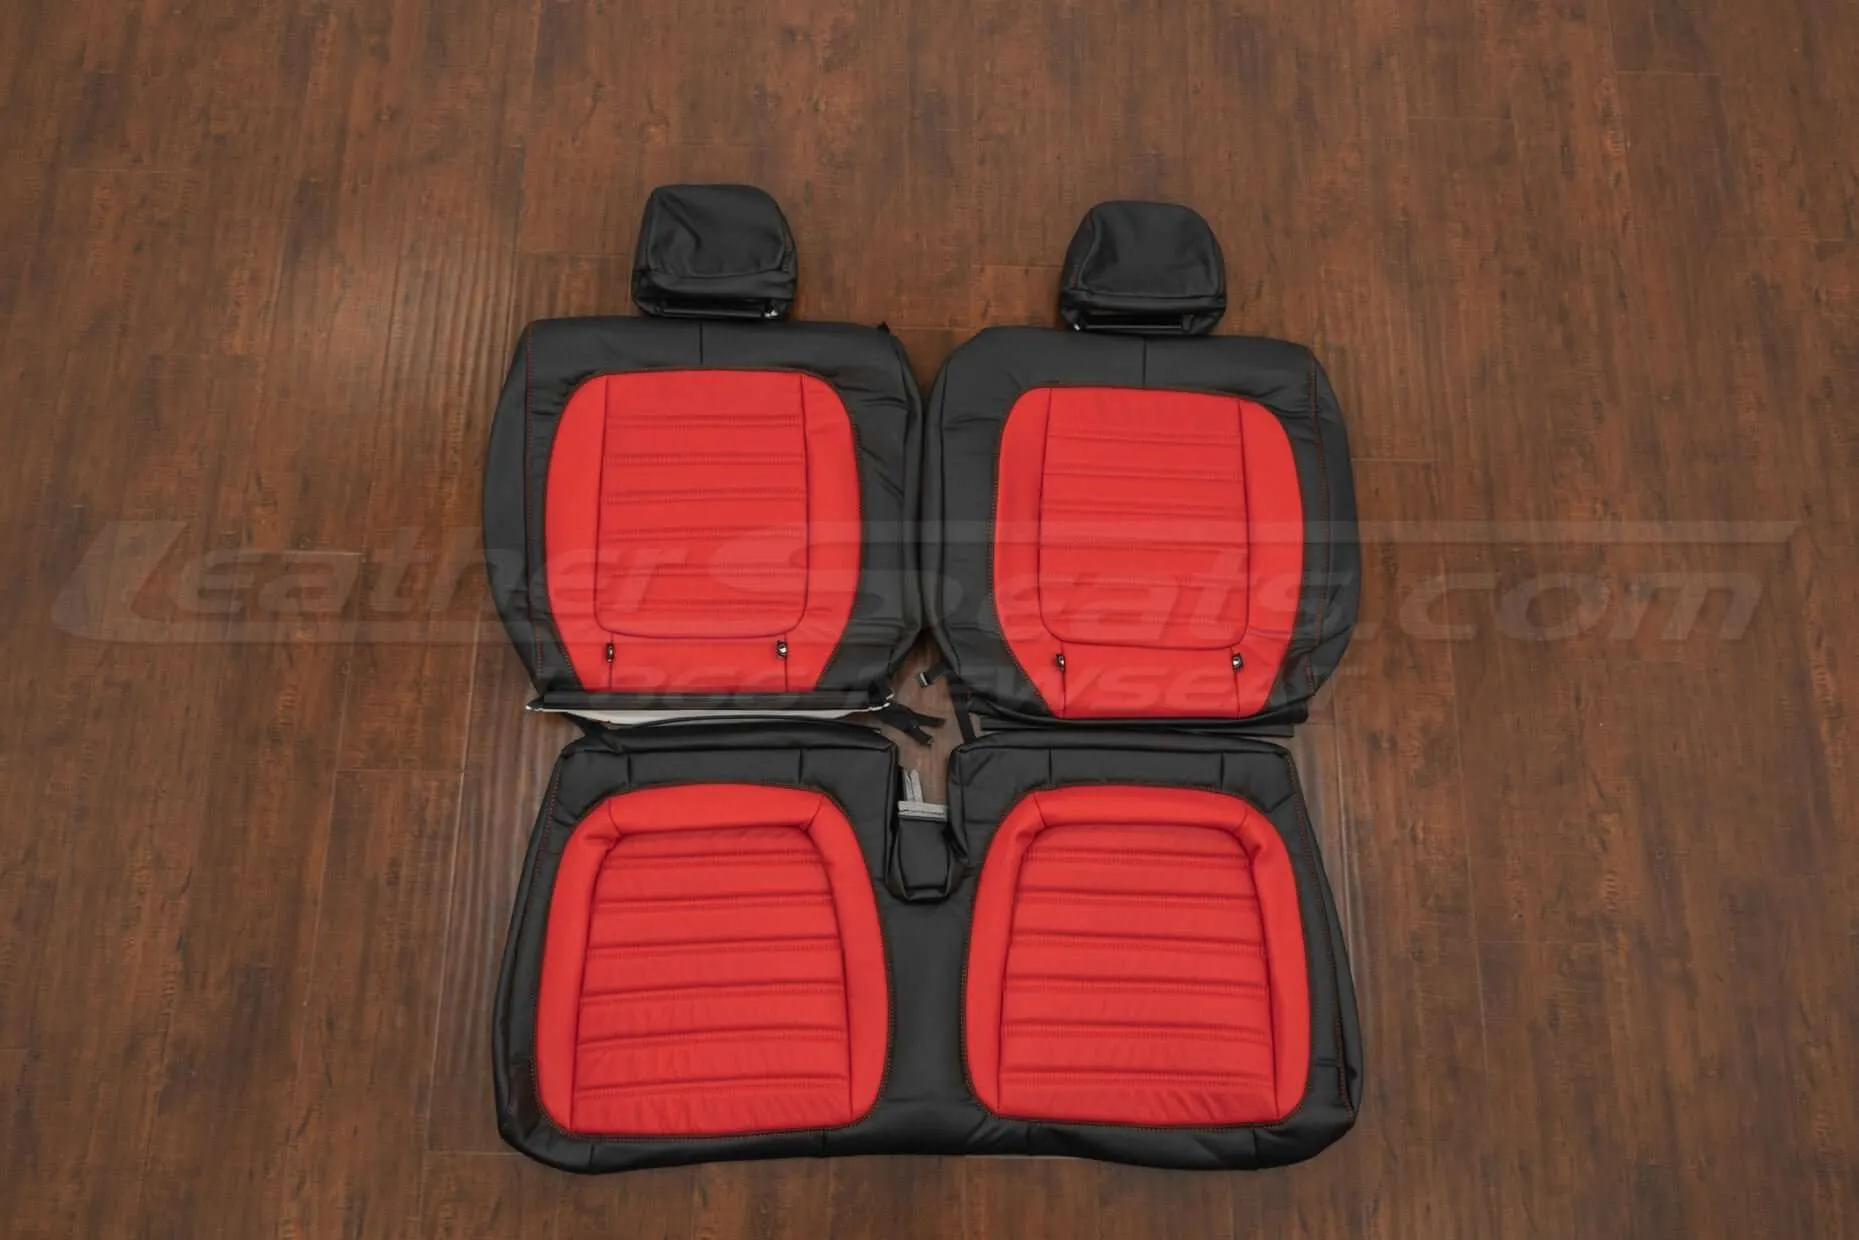 Volkswagen Beetle Leather Kit - Rear seat upholstery - Black & Bright Red